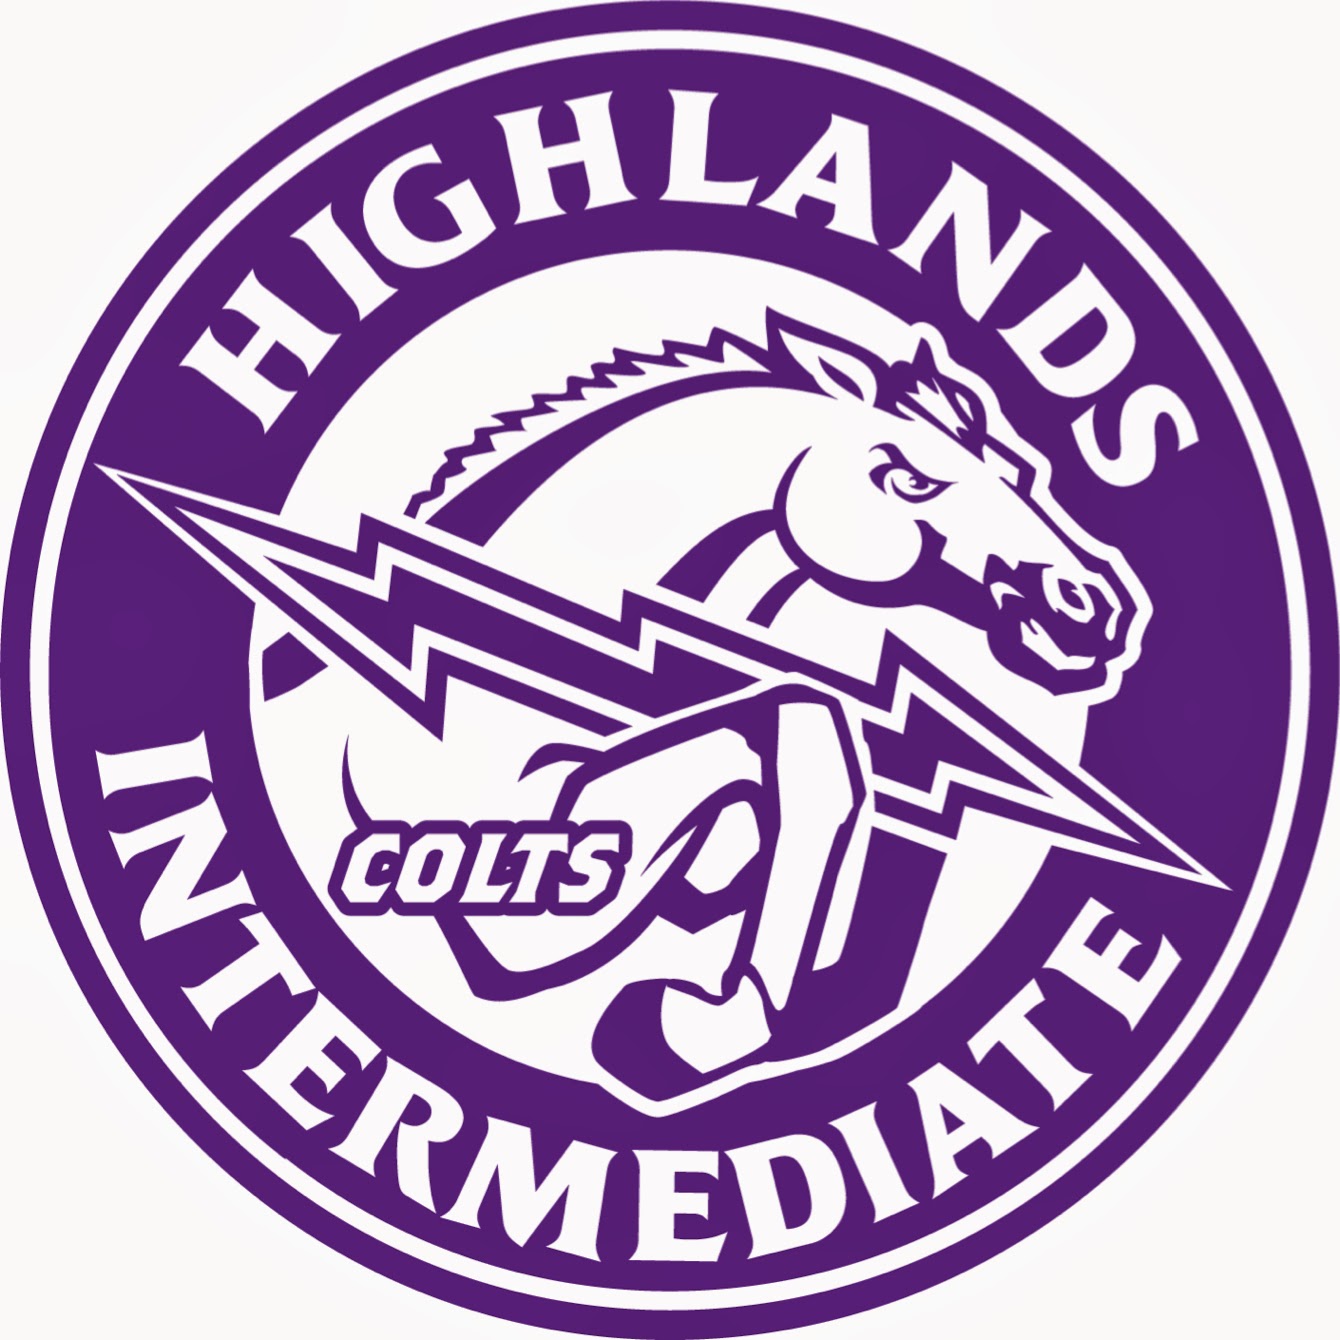 Home of the Highlands Colts!